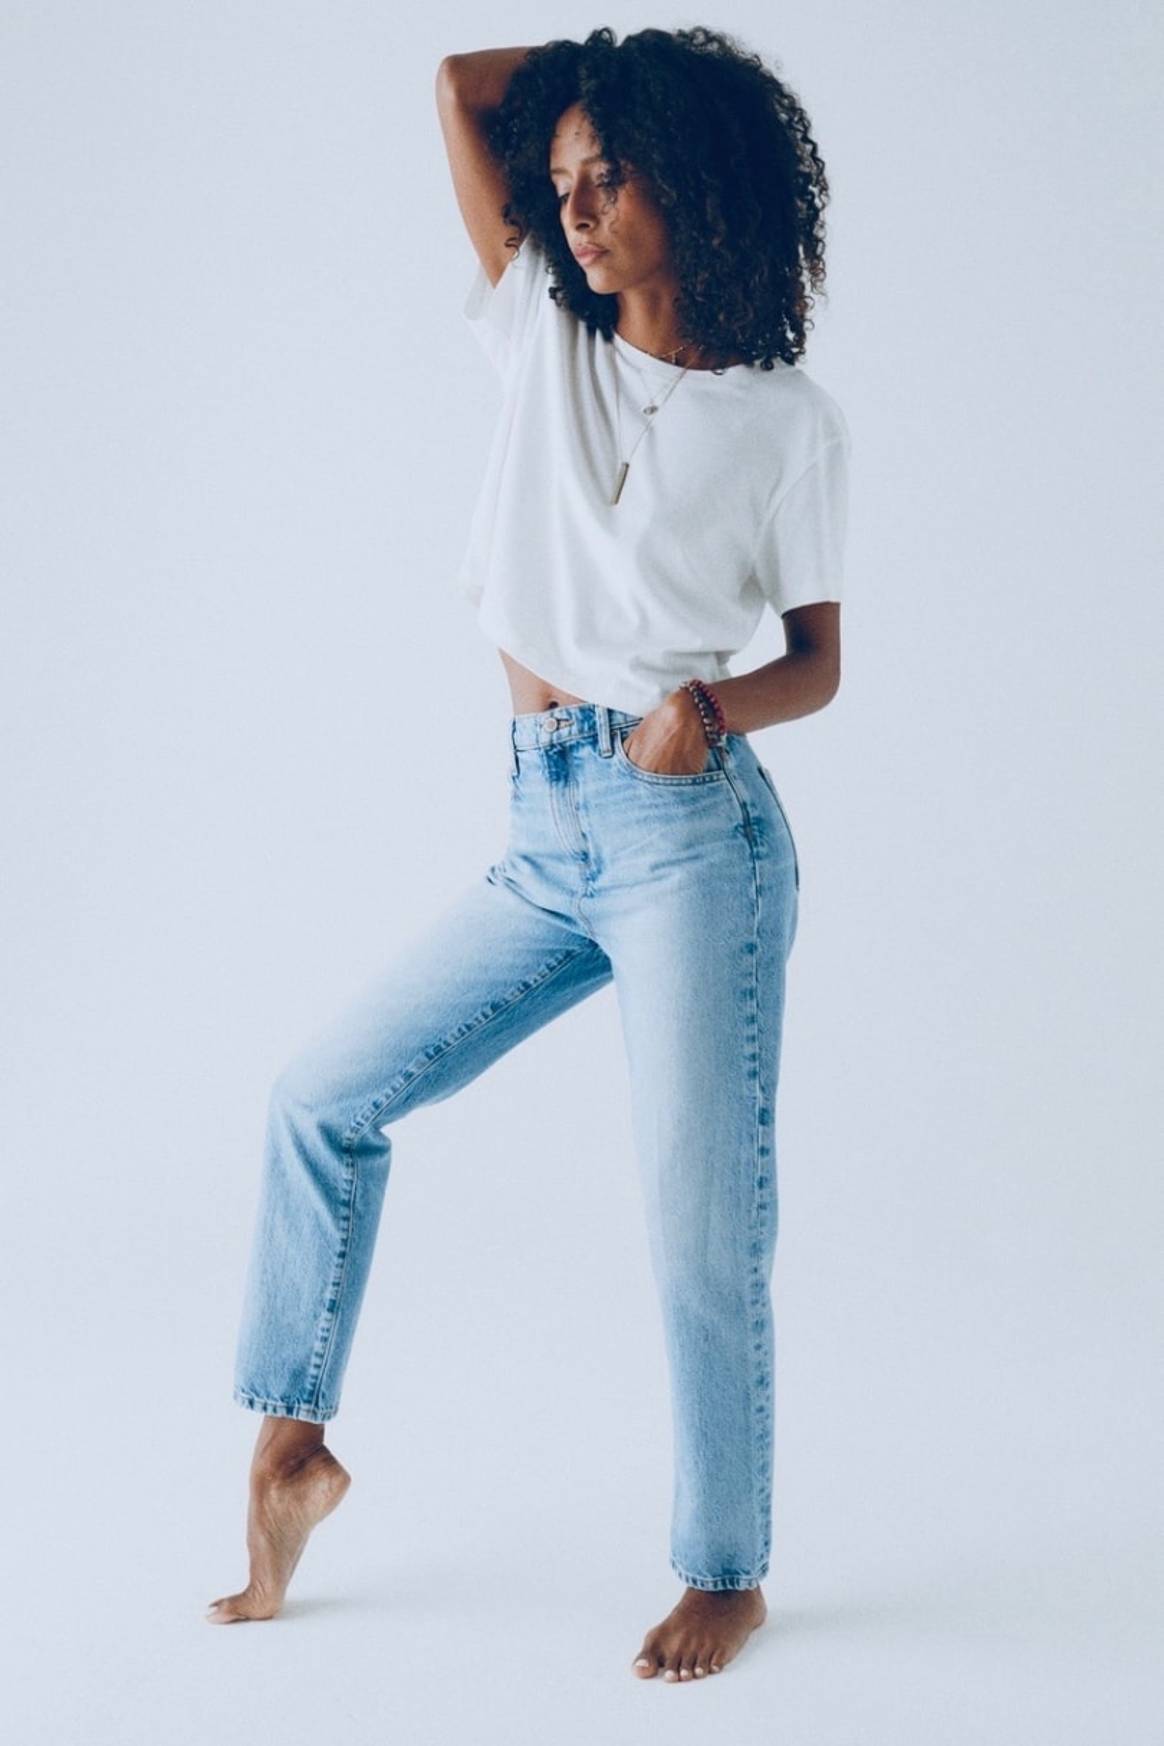 The conscious consumer and how Triarchy denim is answering their needs through transparency